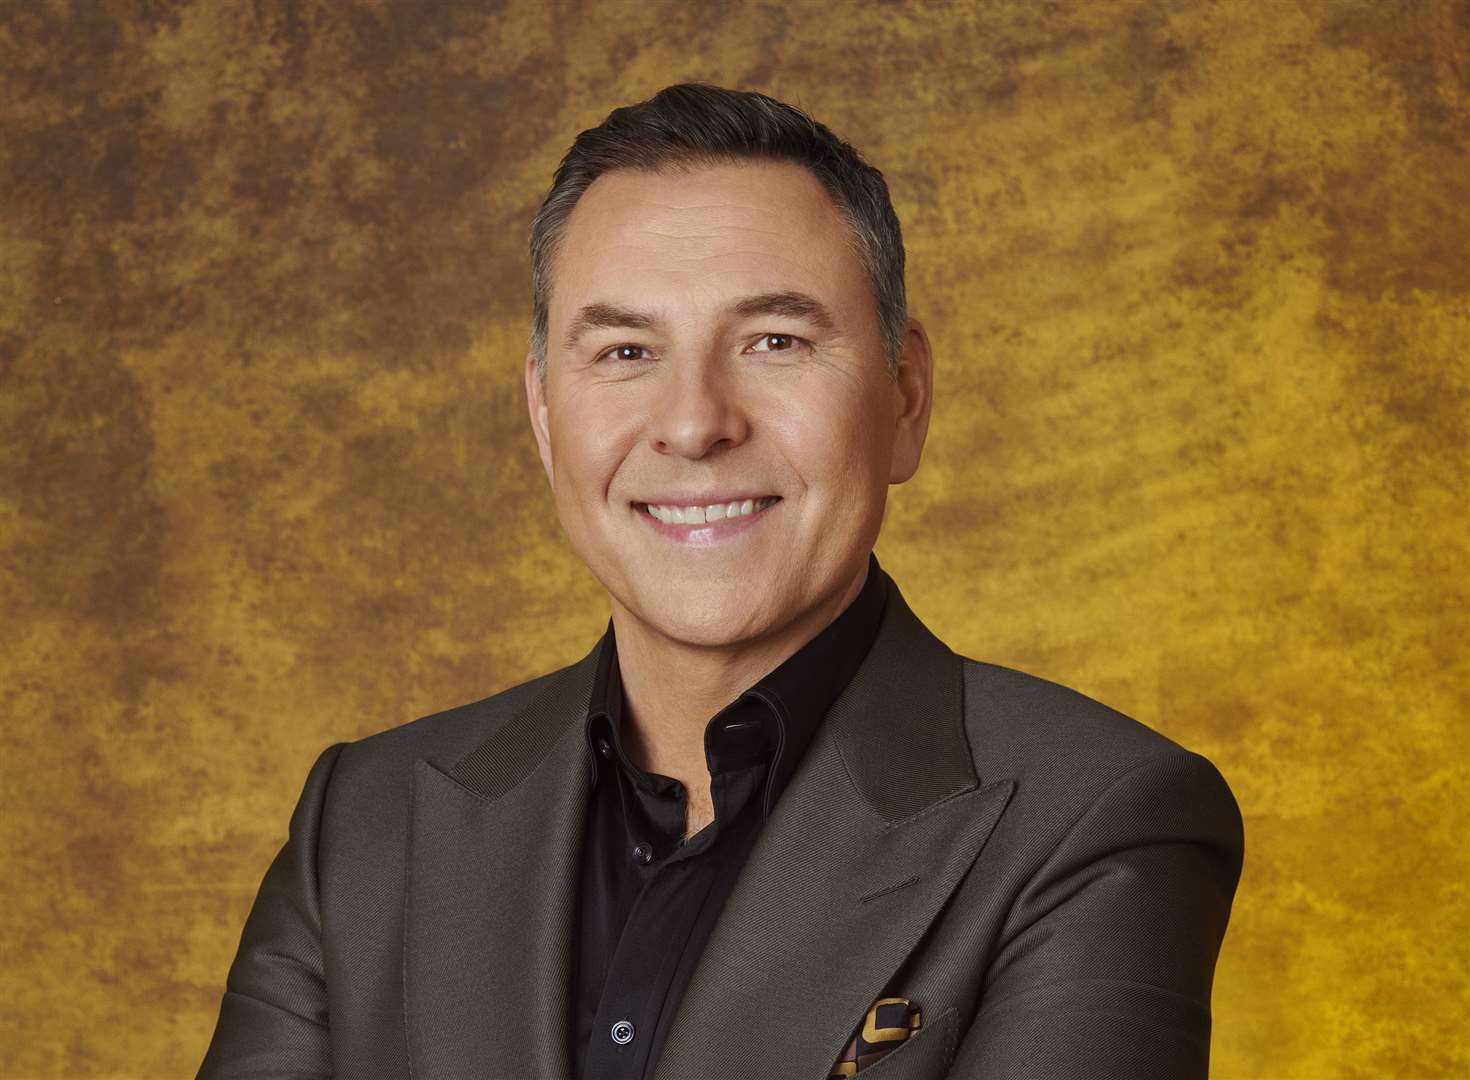 Britain's Got Talent judge and popular children's author David Walliams will be signing books at Bluewater. Picture: ITV